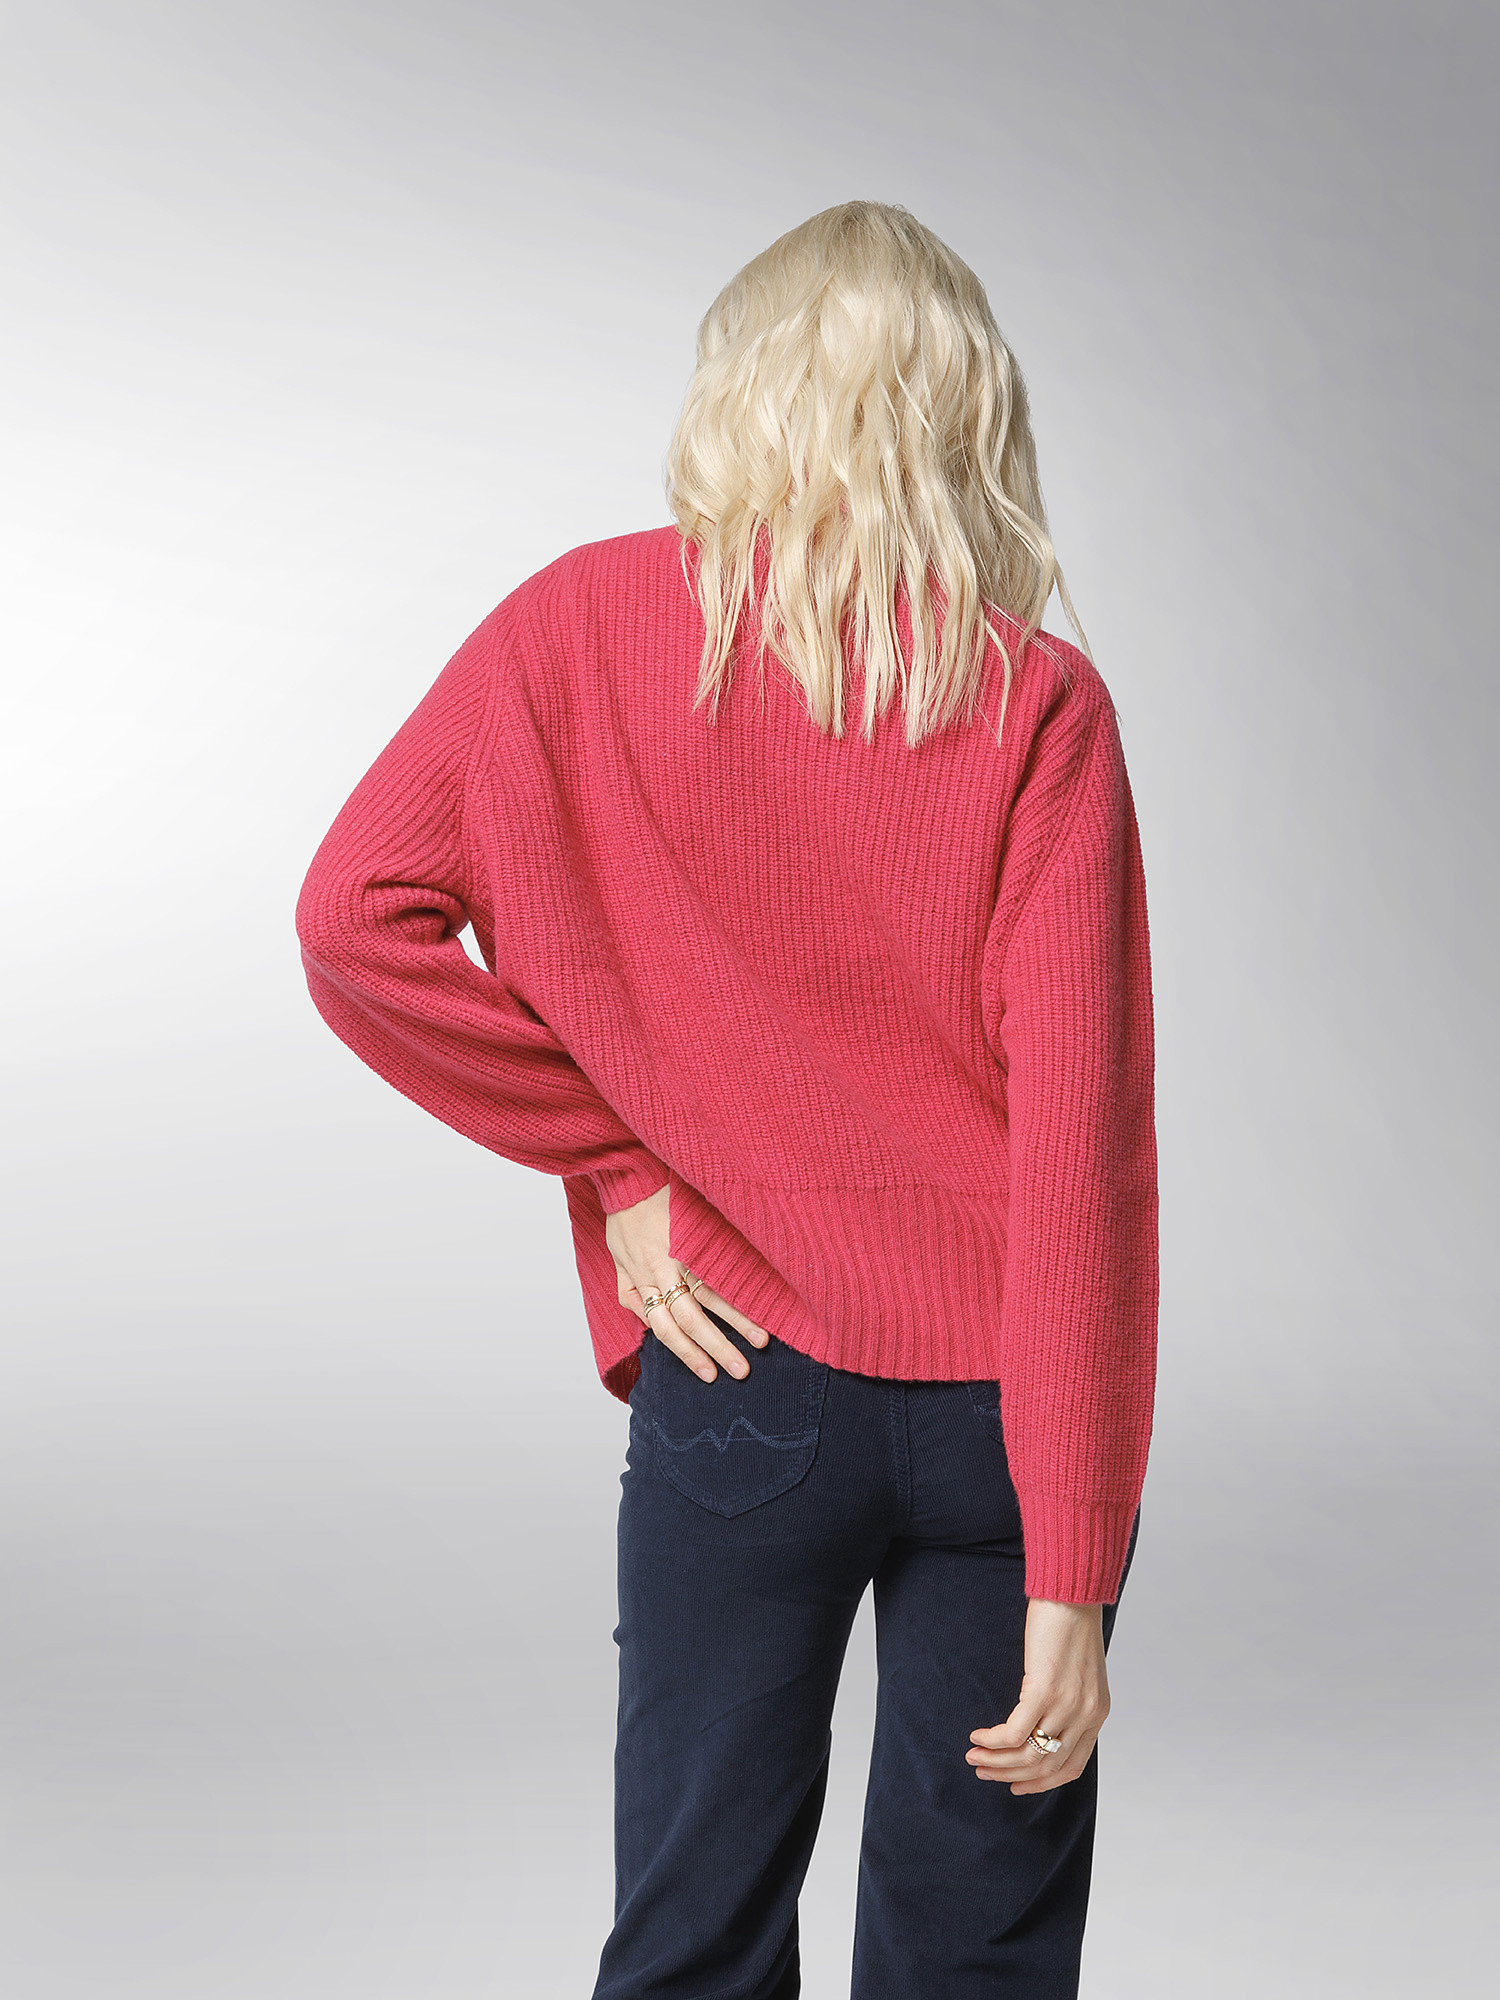 K Collection - Pullover dolcevita in lana cardata, Rosa fuxia, large image number 6